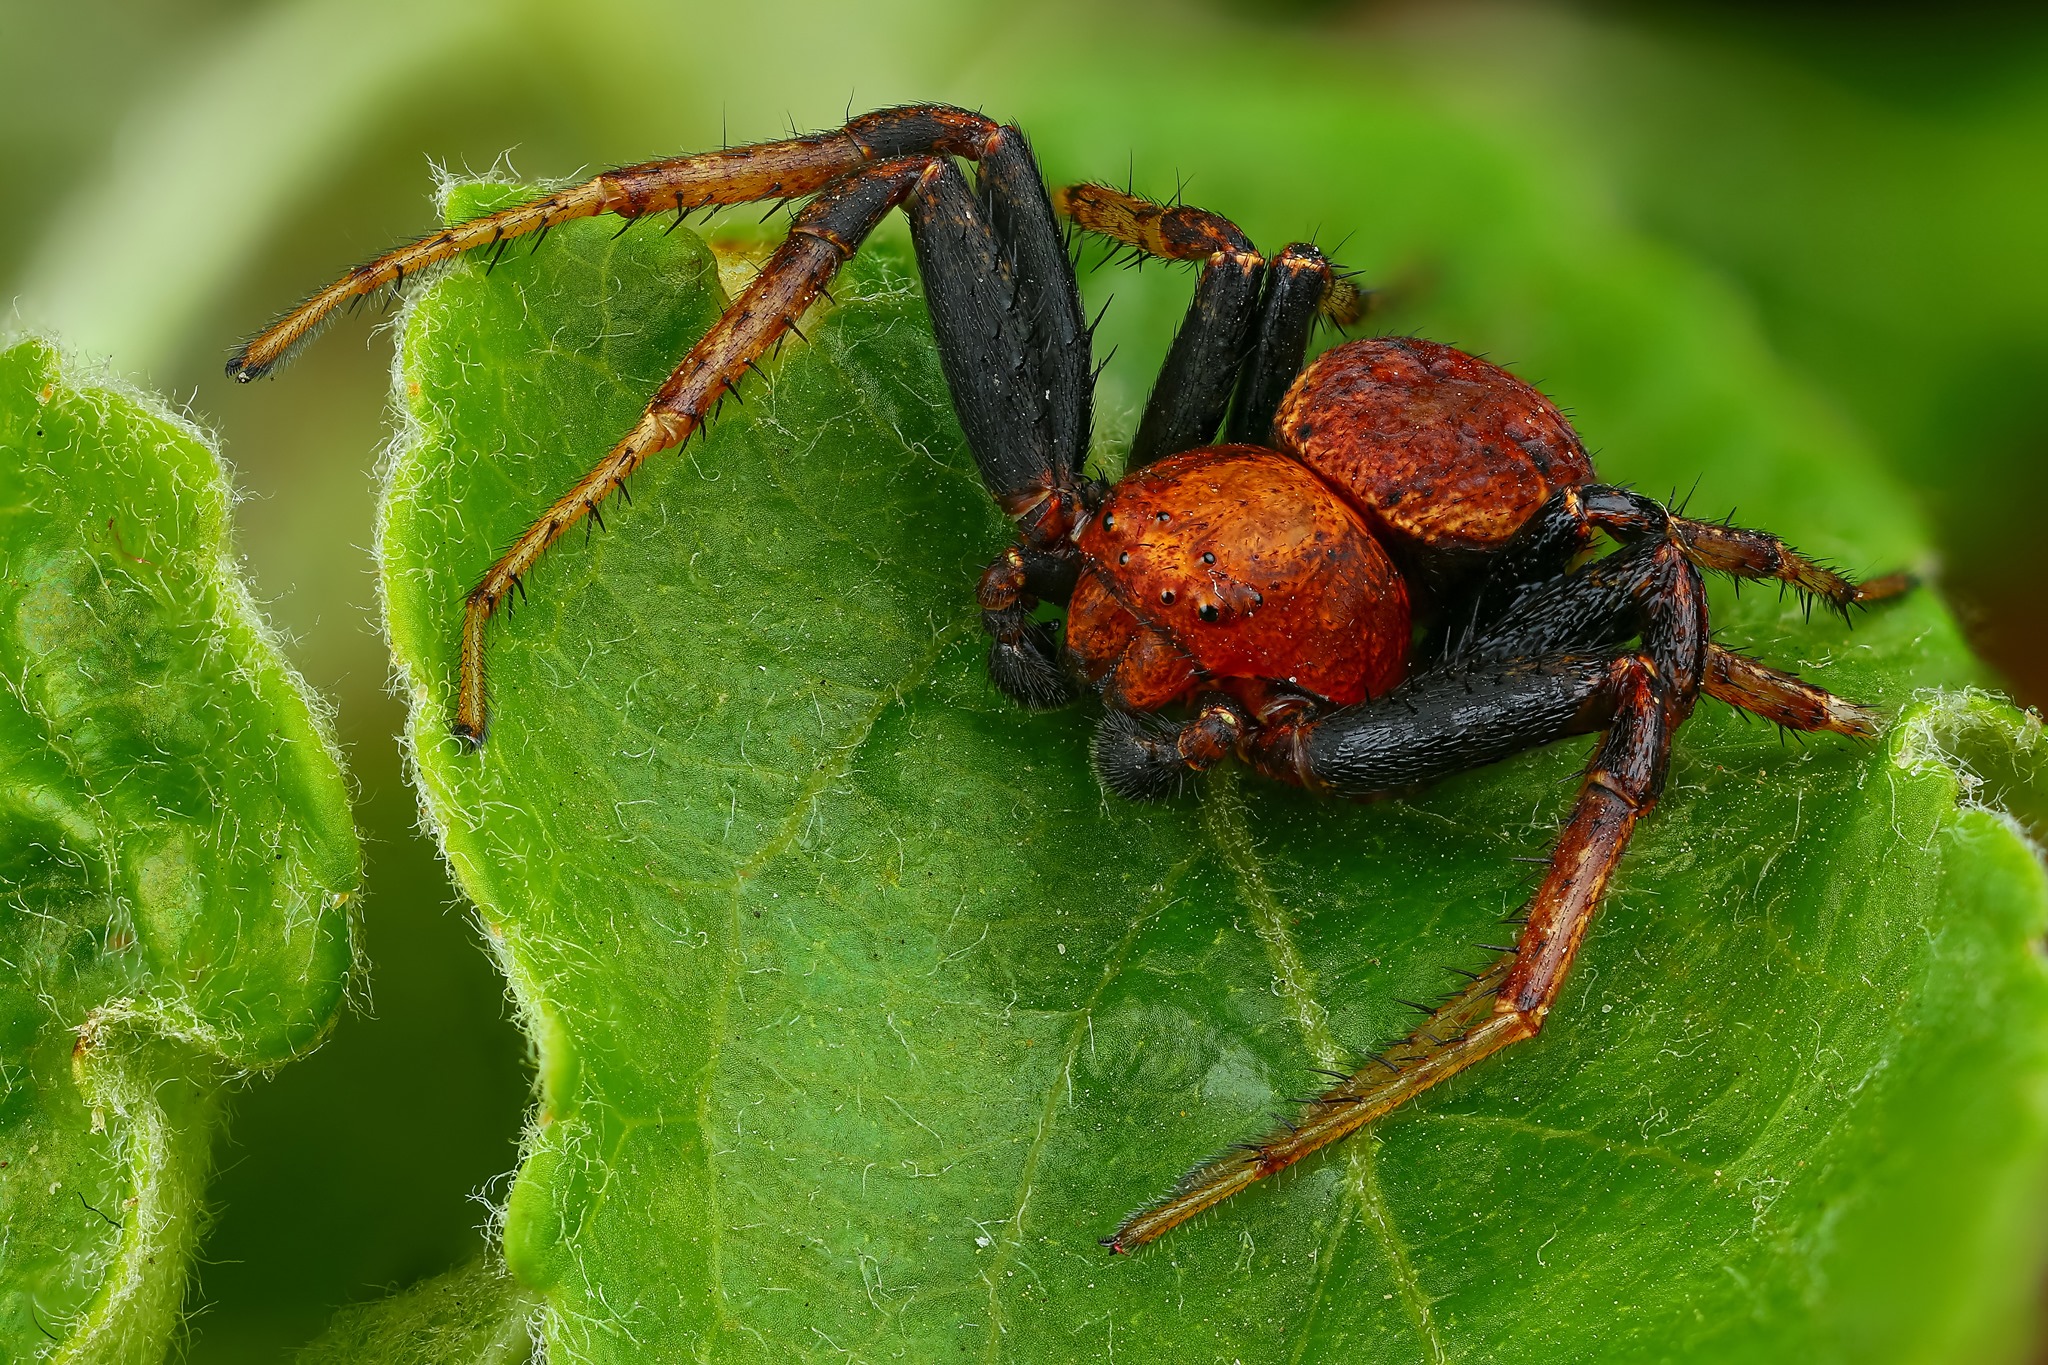 Xysticus luctator